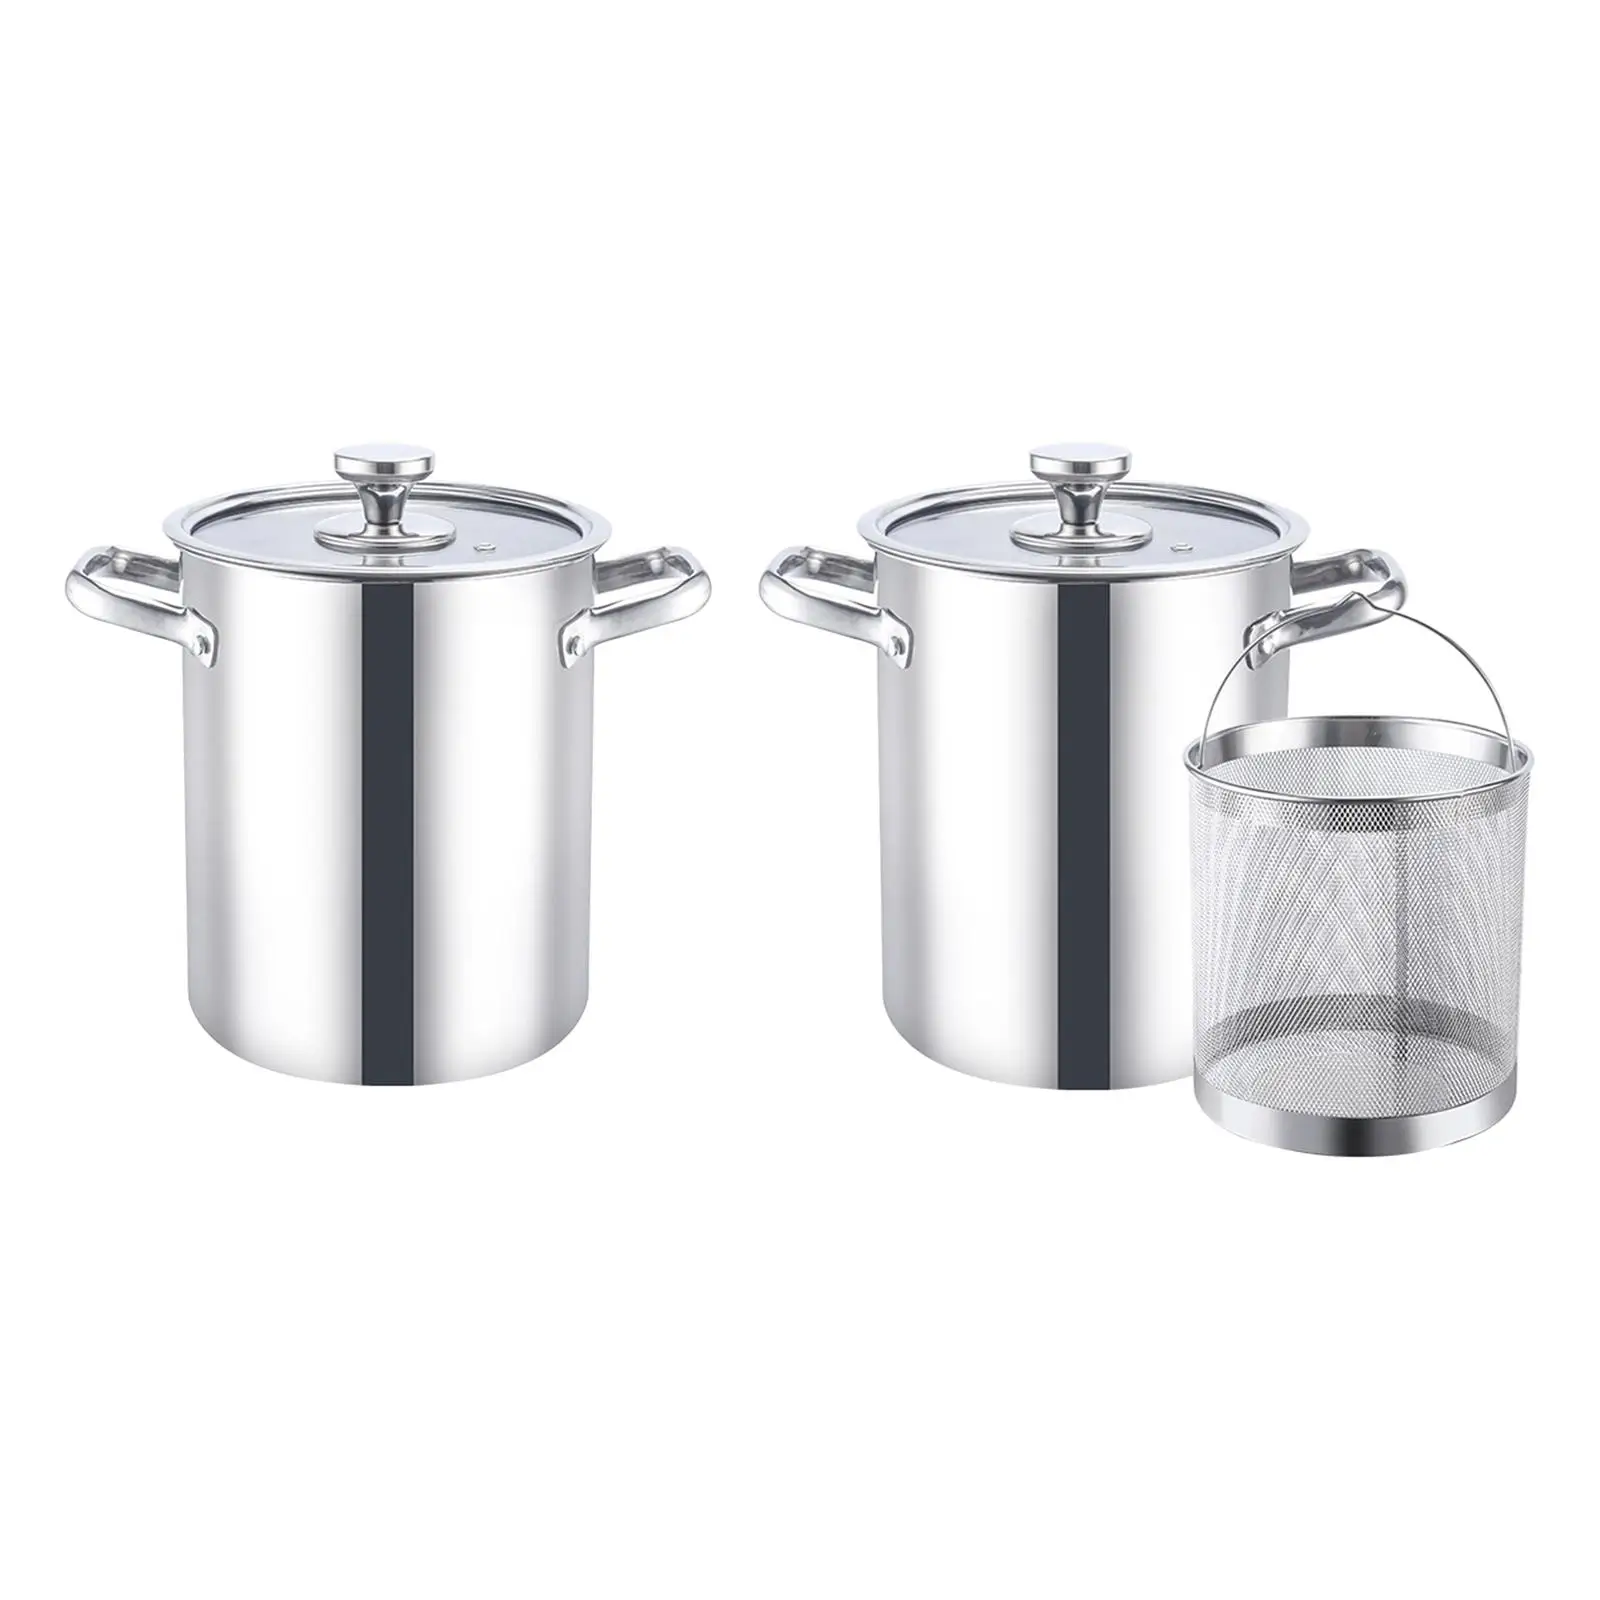 Stockpot with Lid, Kithen Cooking Pot, Stainless Steel Rice Bucket Large